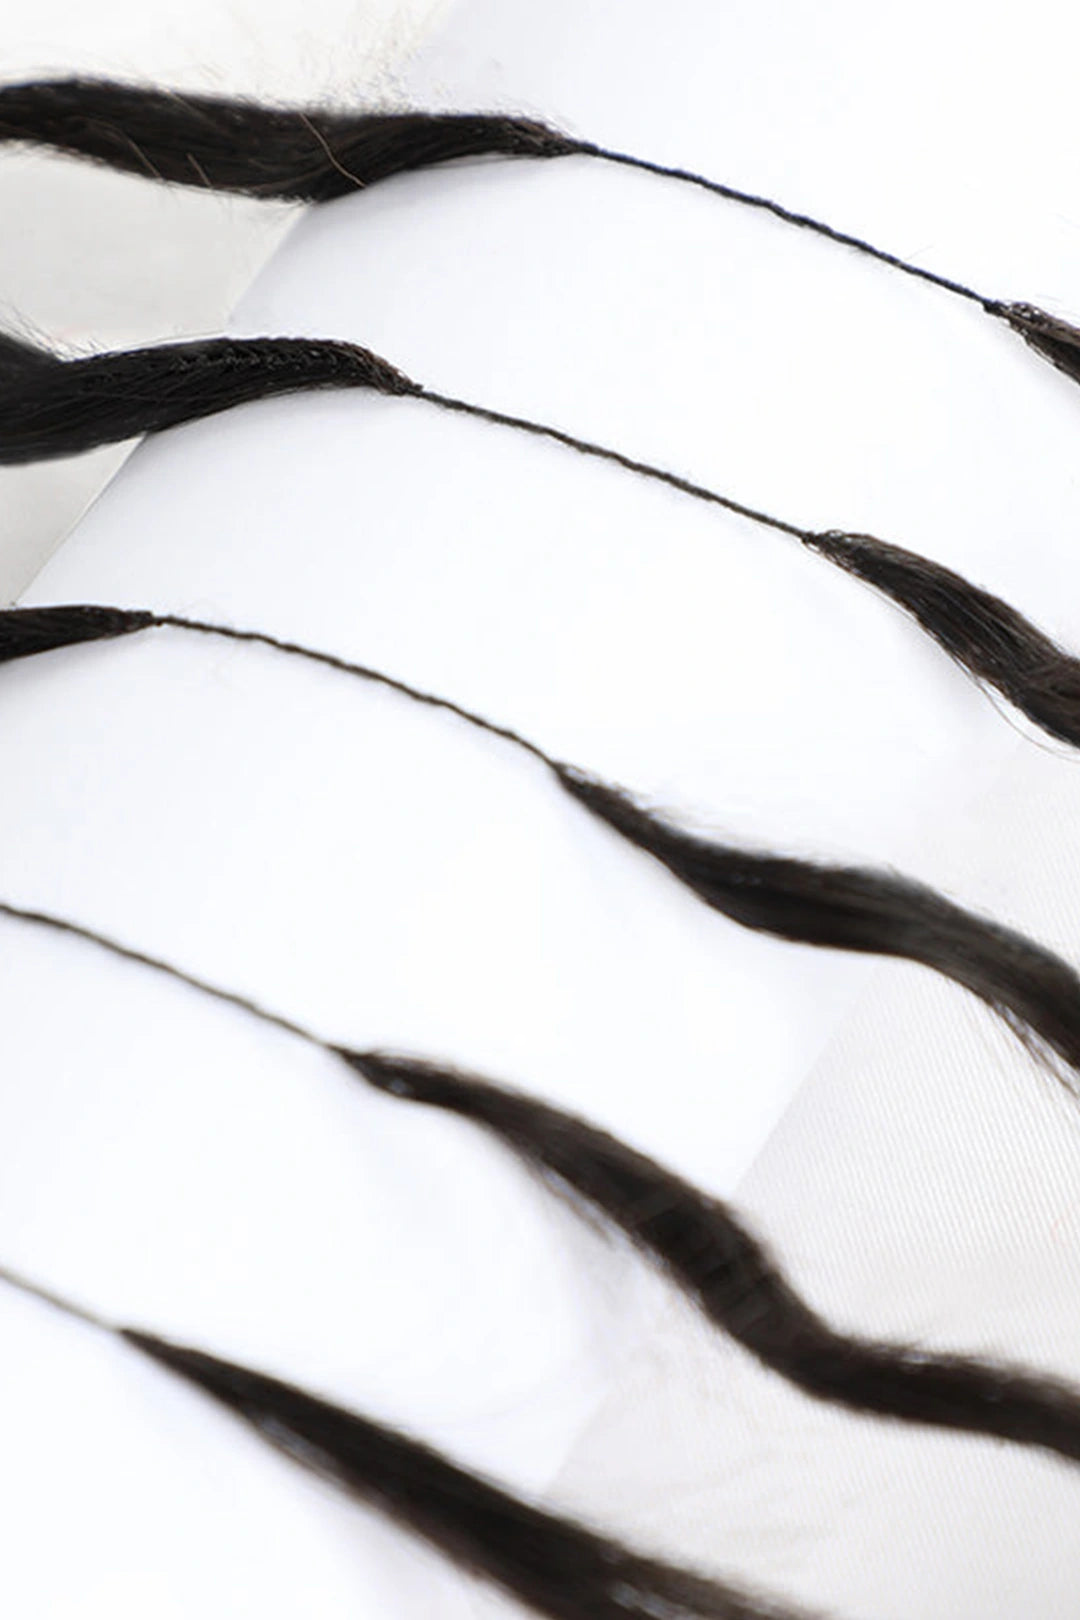 Feather Line Hair Extensions Deep Curly Detailss